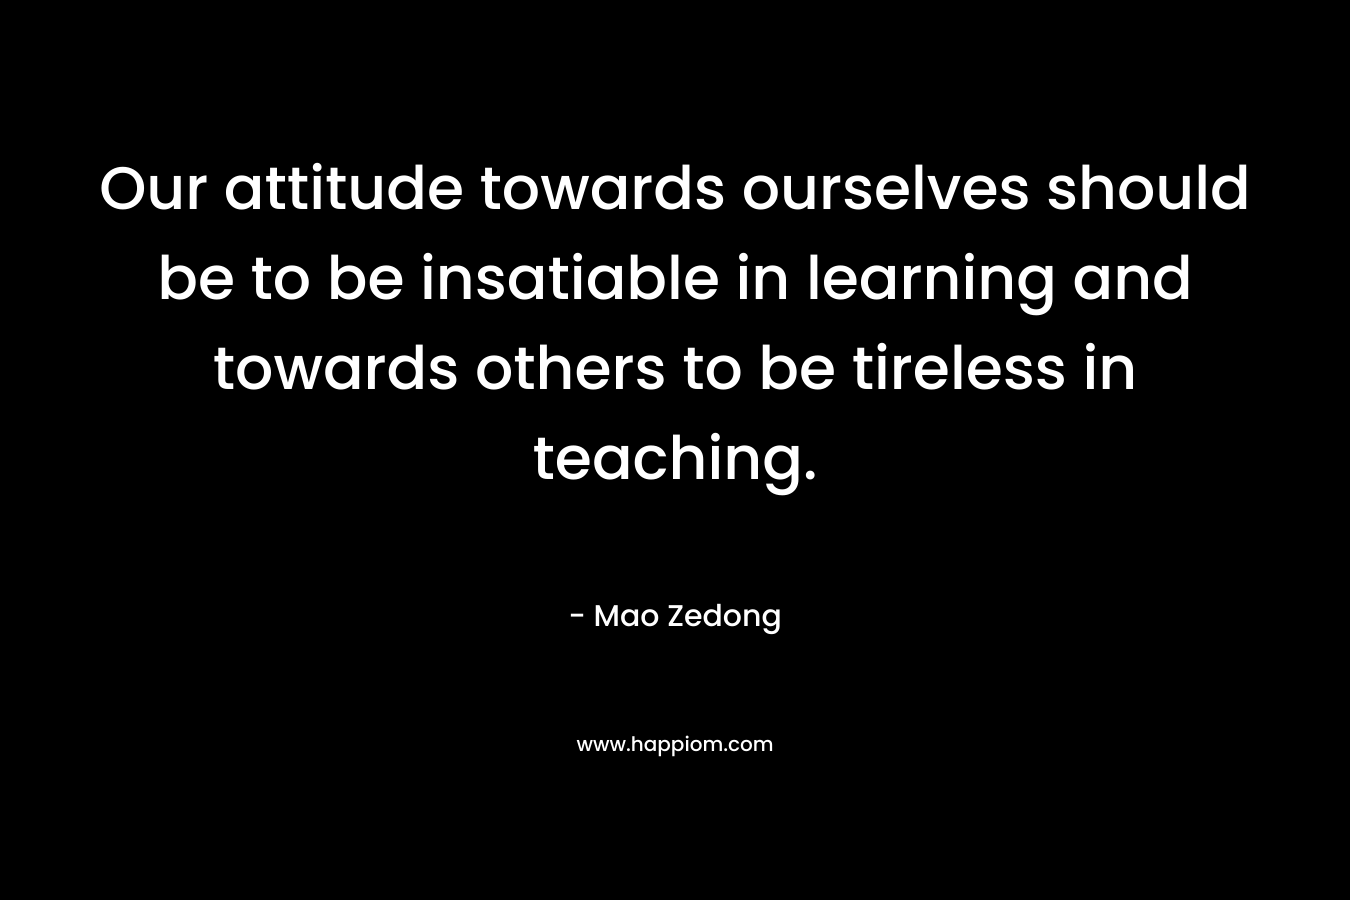 Our attitude towards ourselves should be to be insatiable in learning and towards others to be tireless in teaching. – Mao Zedong